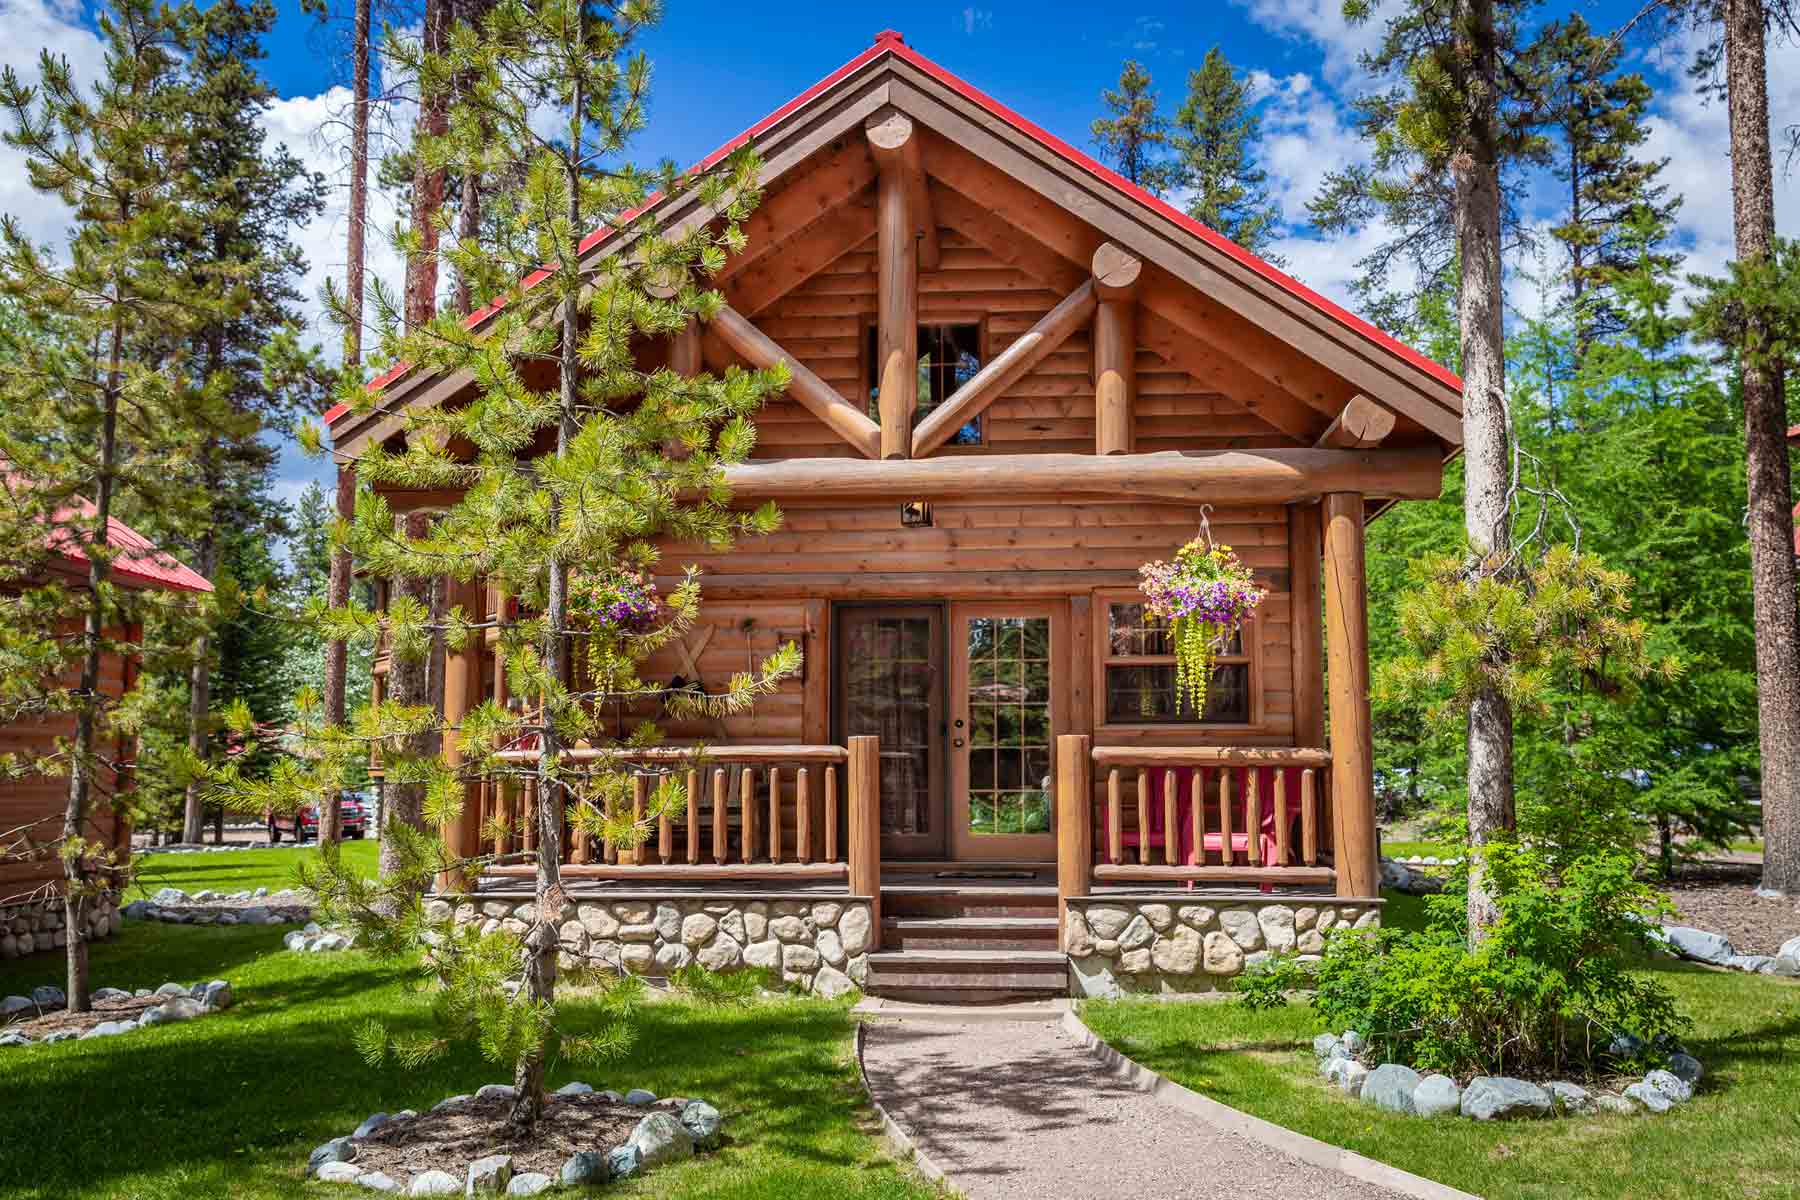 Find a log home builder near you